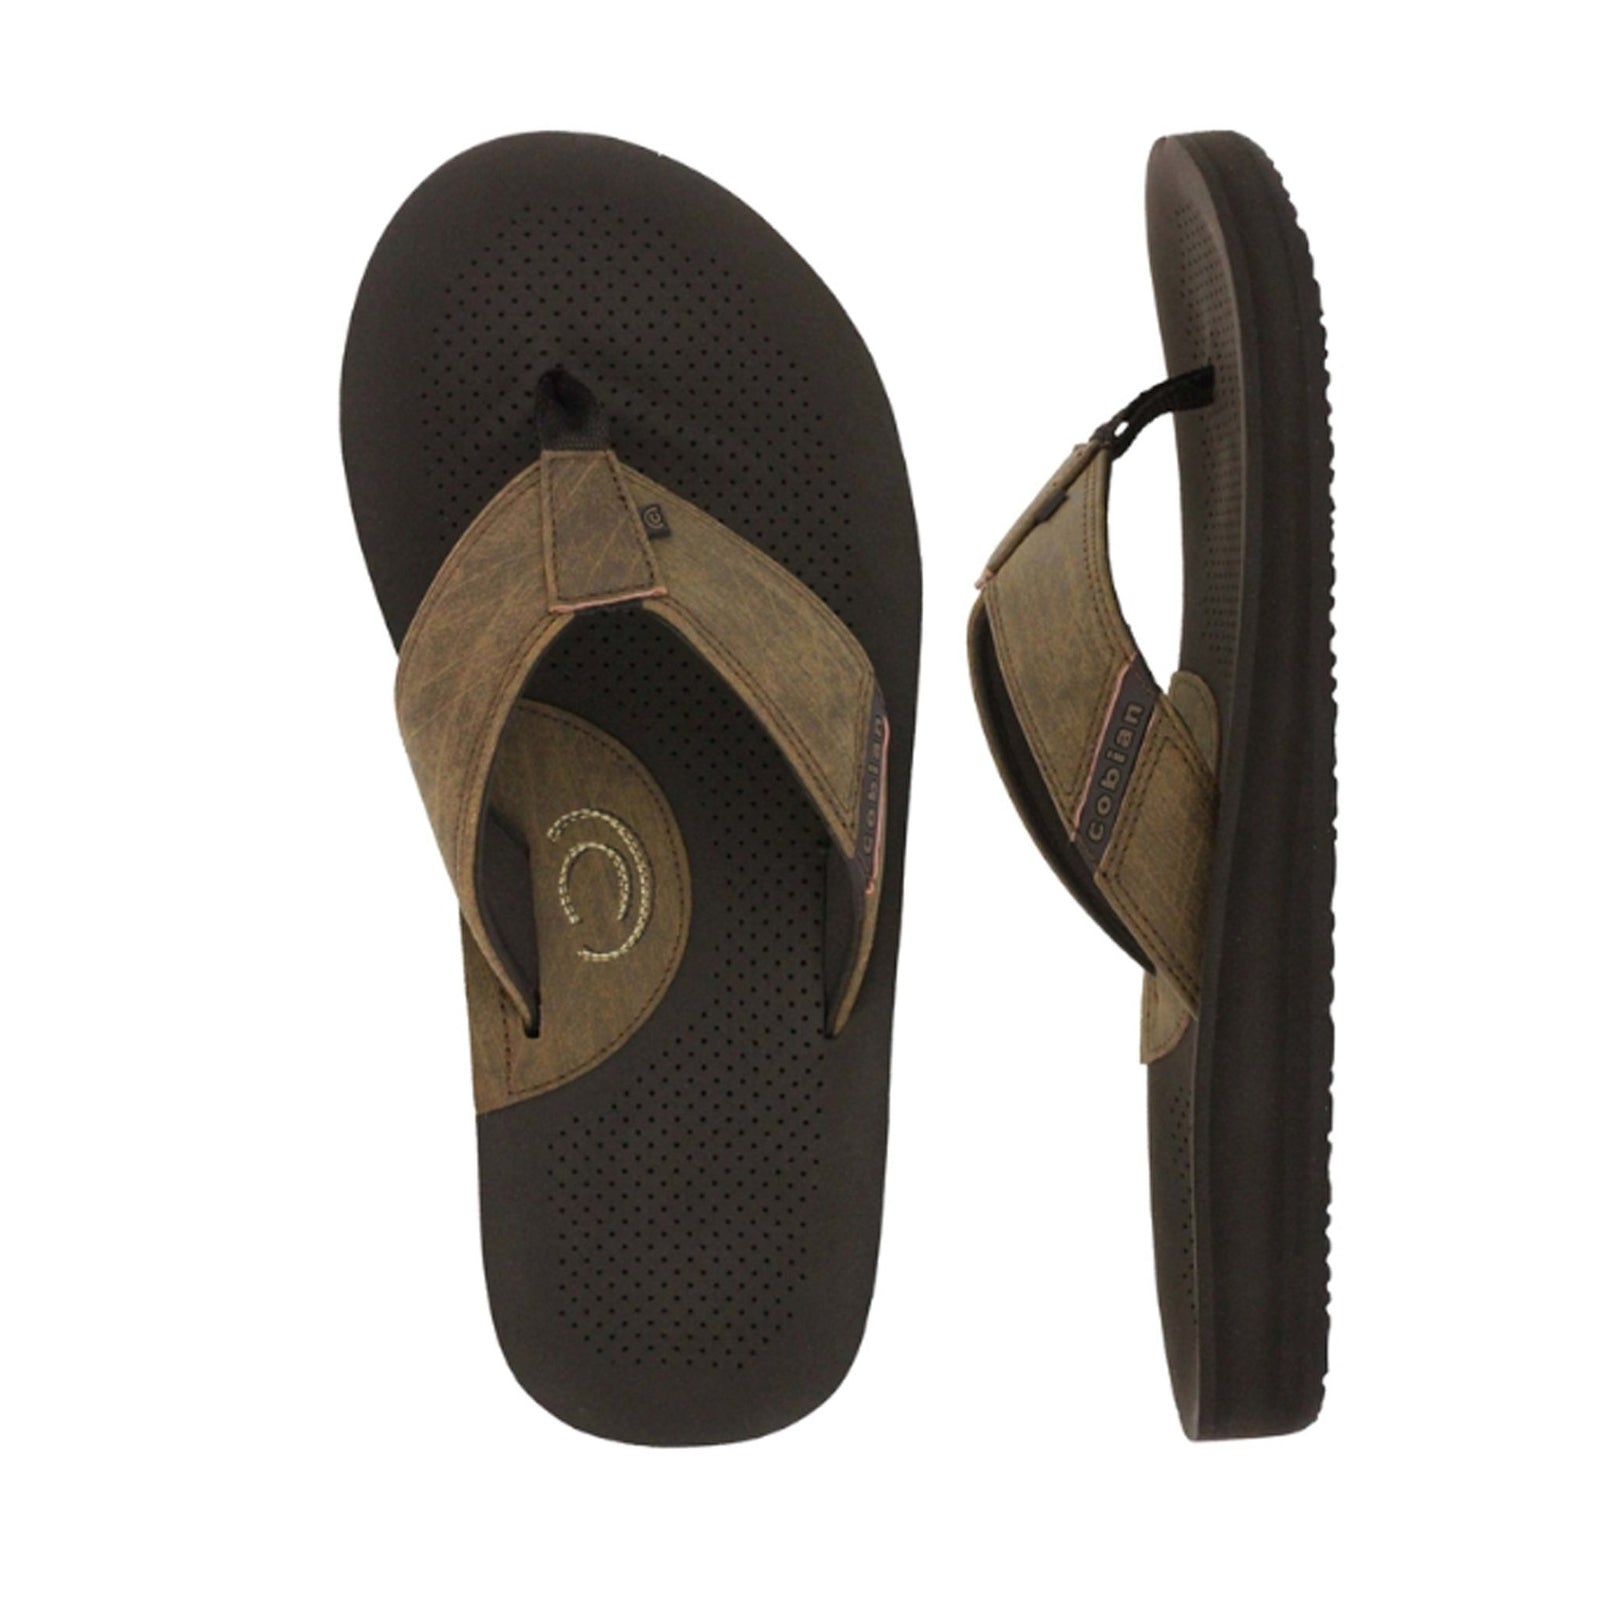 Cobian Sandals - Surf Station Store